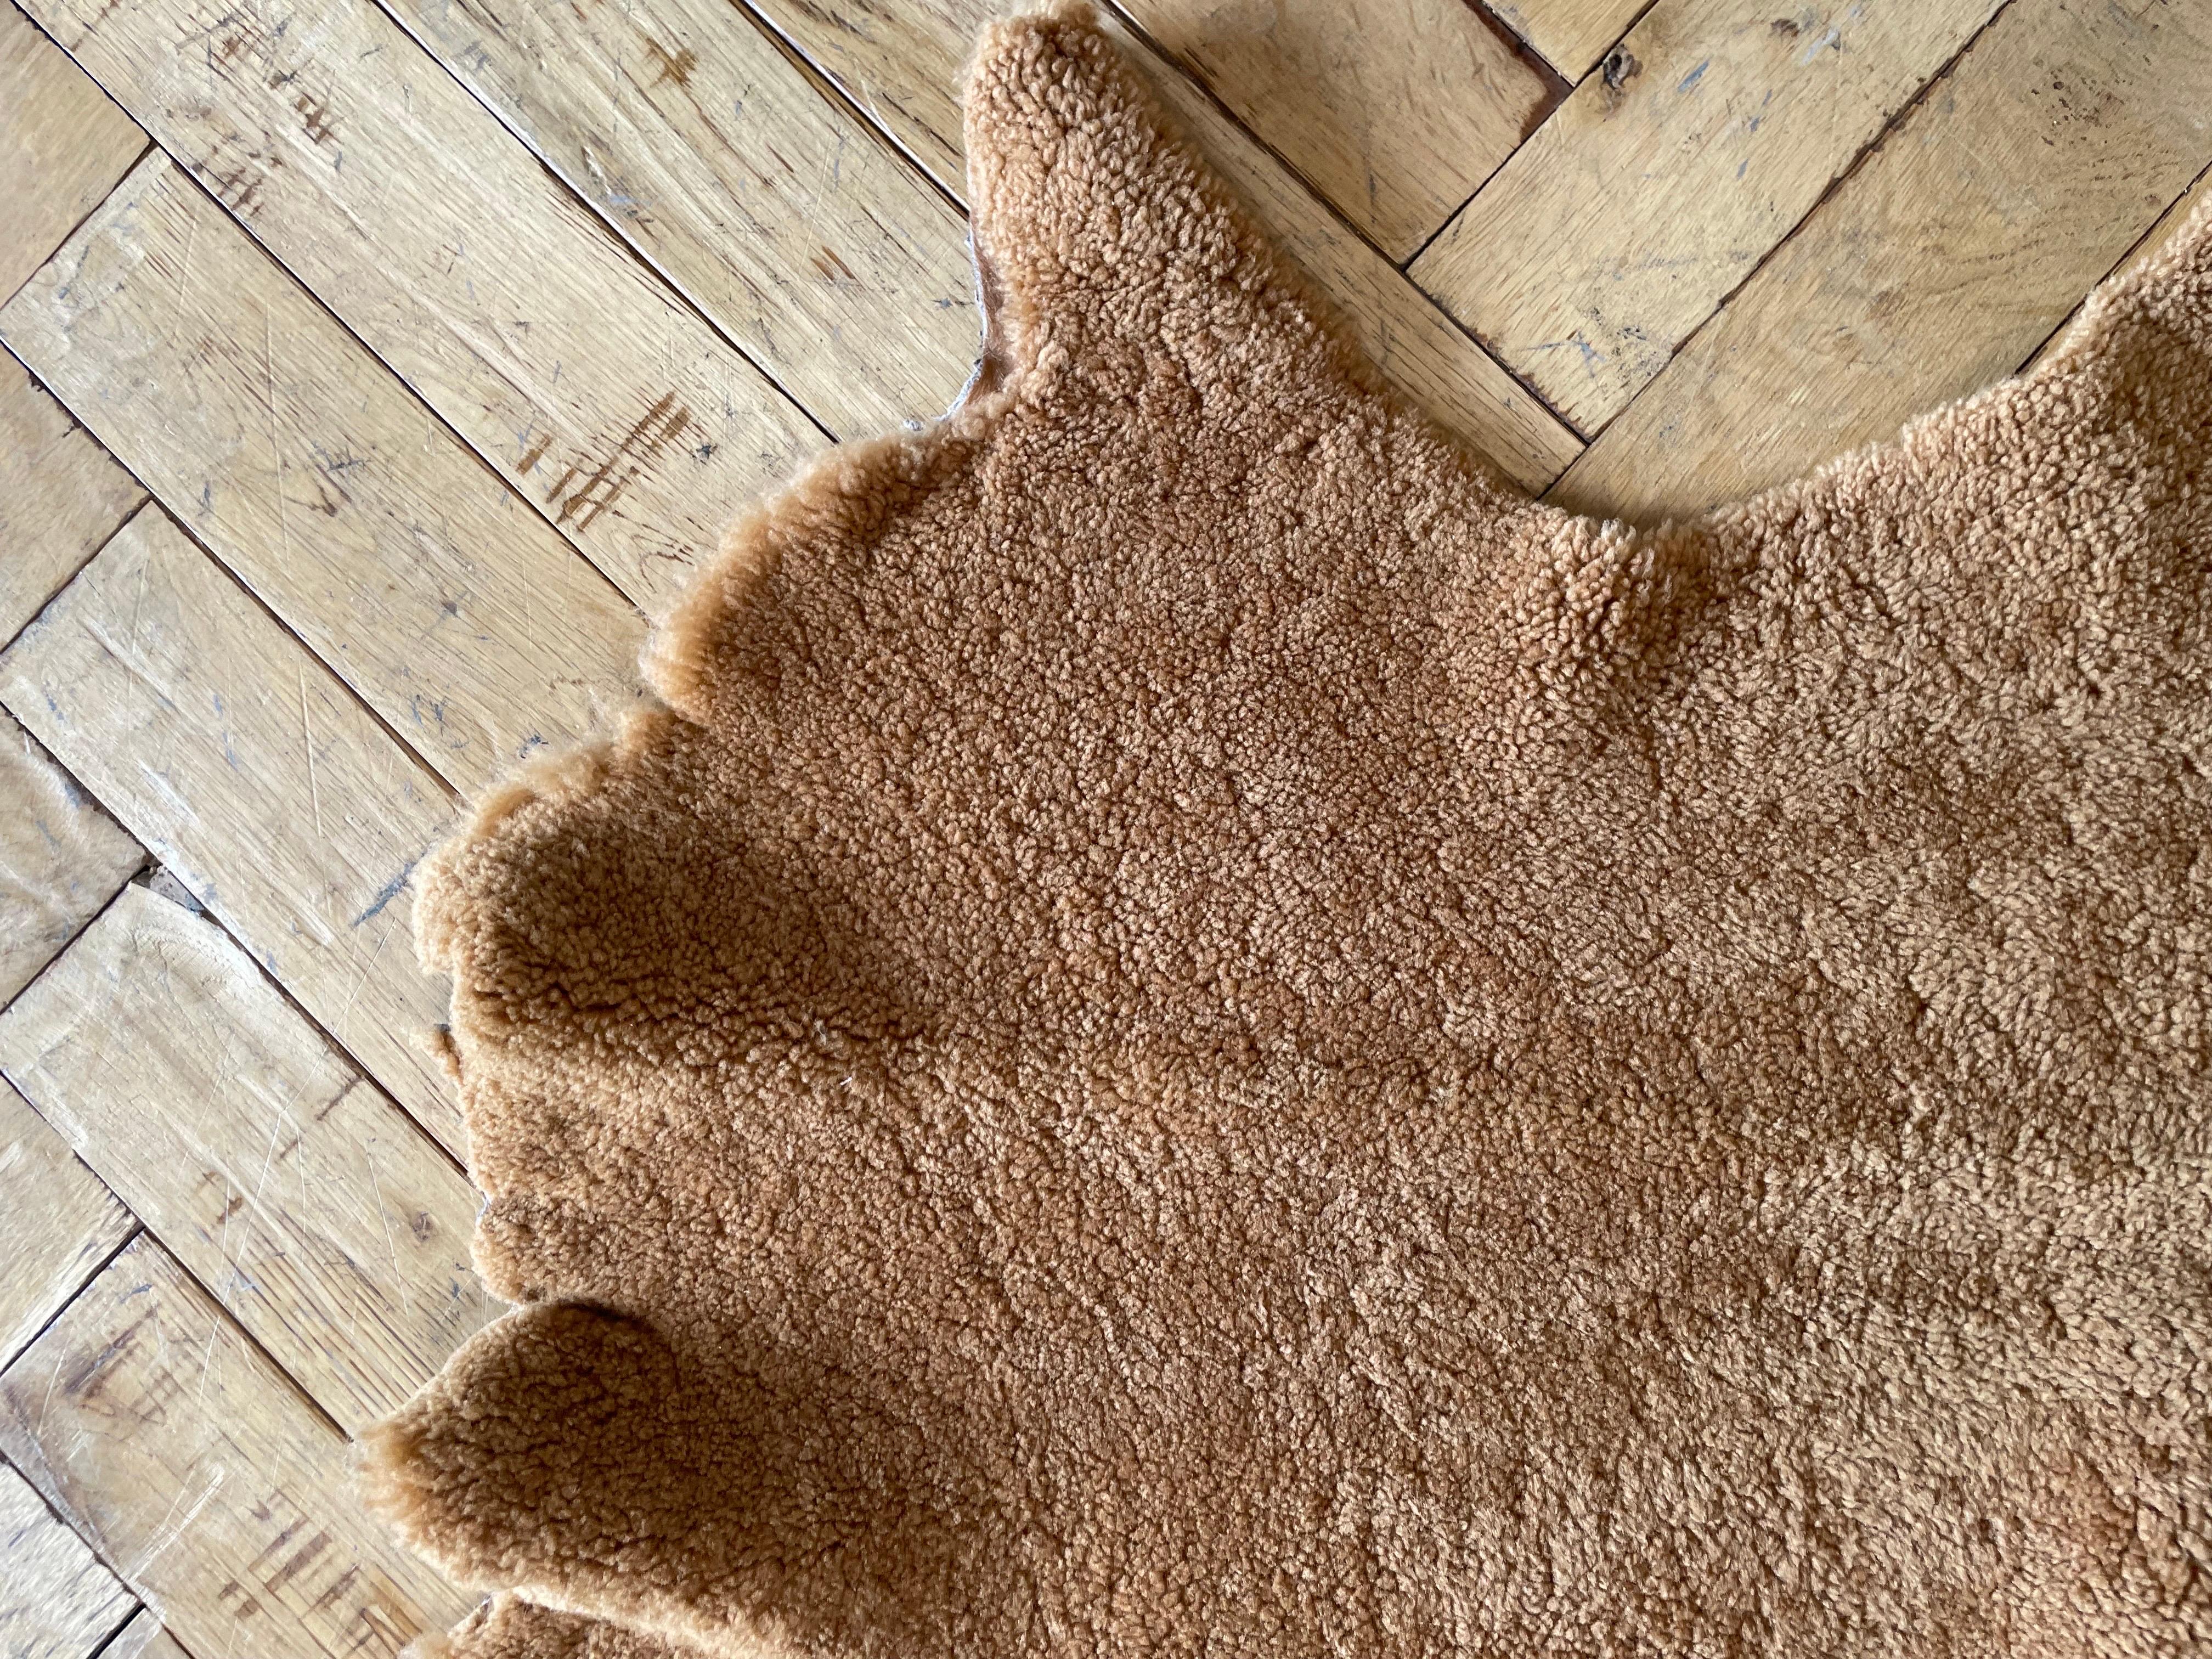 Natural Sheepskin Rug or Throw in Chocolate Brown Color 1